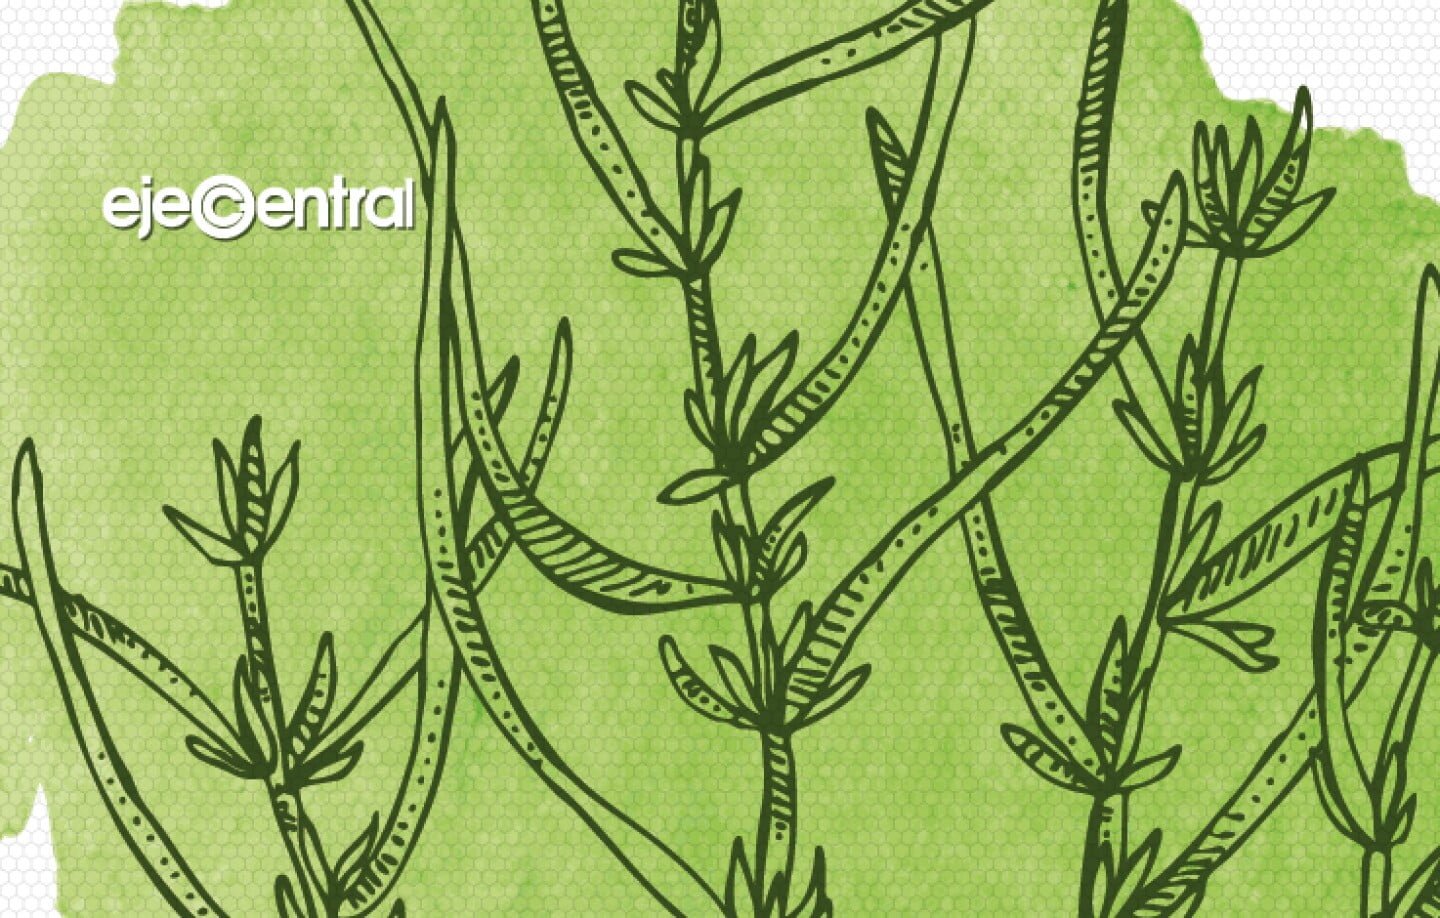 A digital drawing of plants with black outlines on a textured green background, watermarked by "ejeCentral".